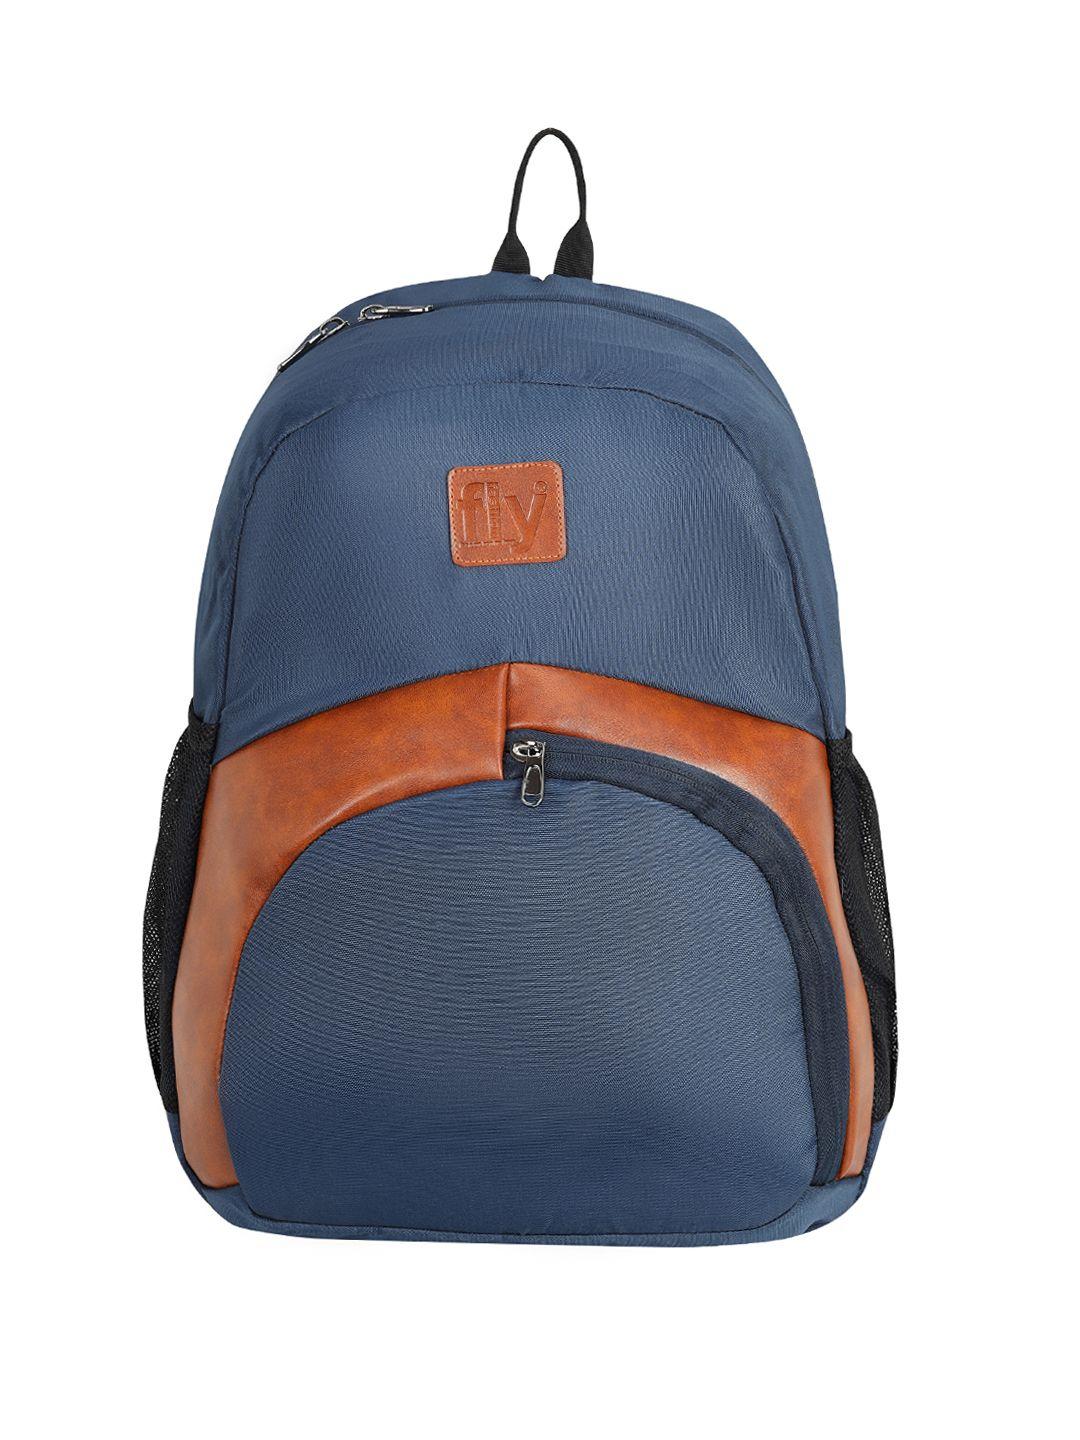 fly fashion unisex blue & tan brown colourblocked backpack